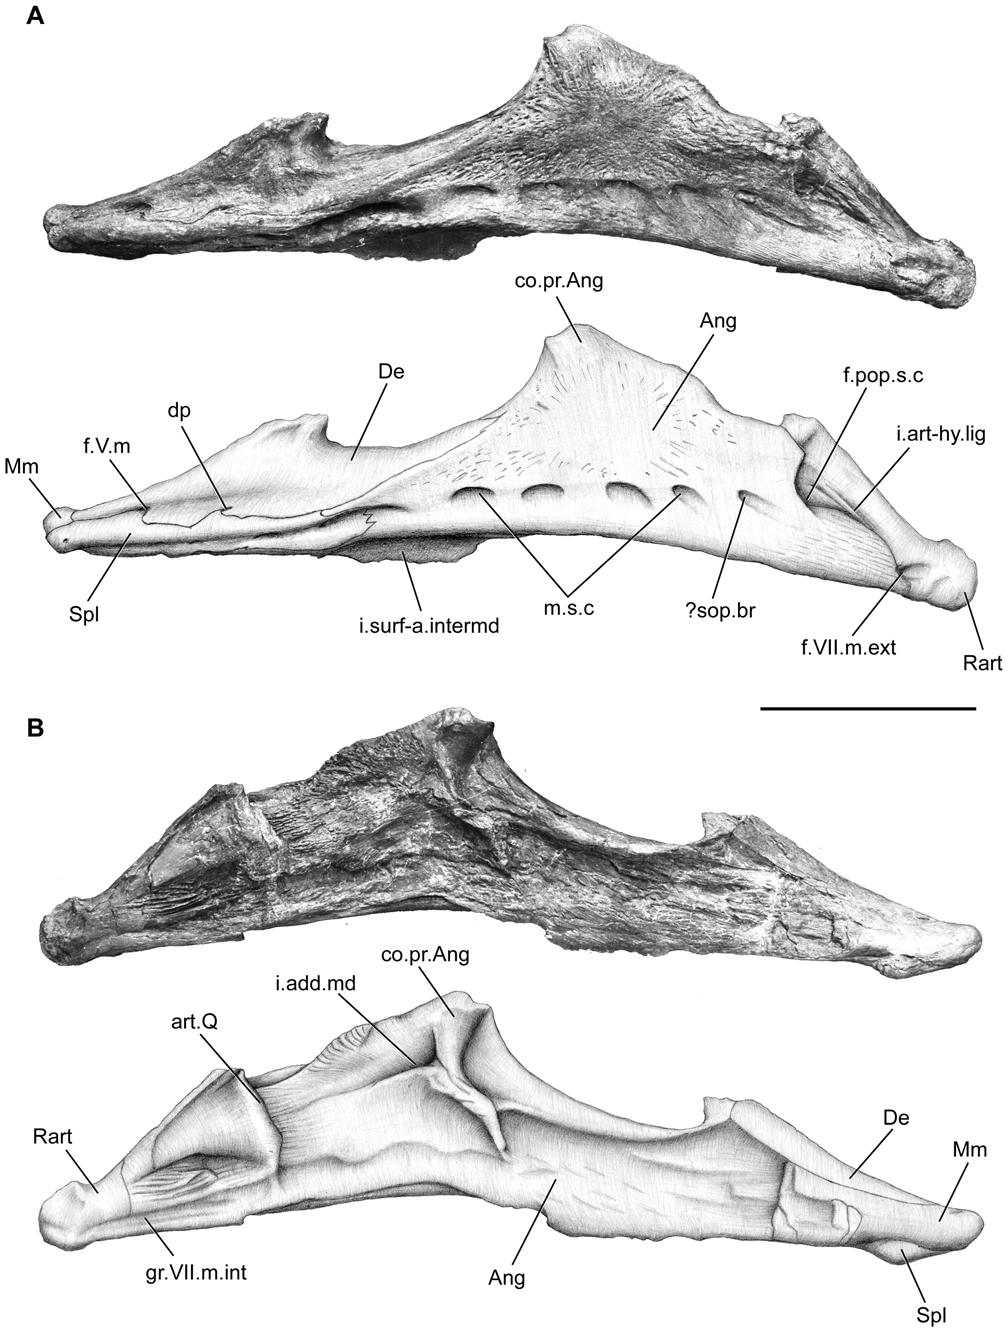 Figure 13. Megalocoelacanthus dobiei Schwimmer, Stewart & Williams, 1994, AMNH FF 20267 from lower Campanian of the Niobrara Formation. Left lower jaw. A, lateral view. B, medial view.